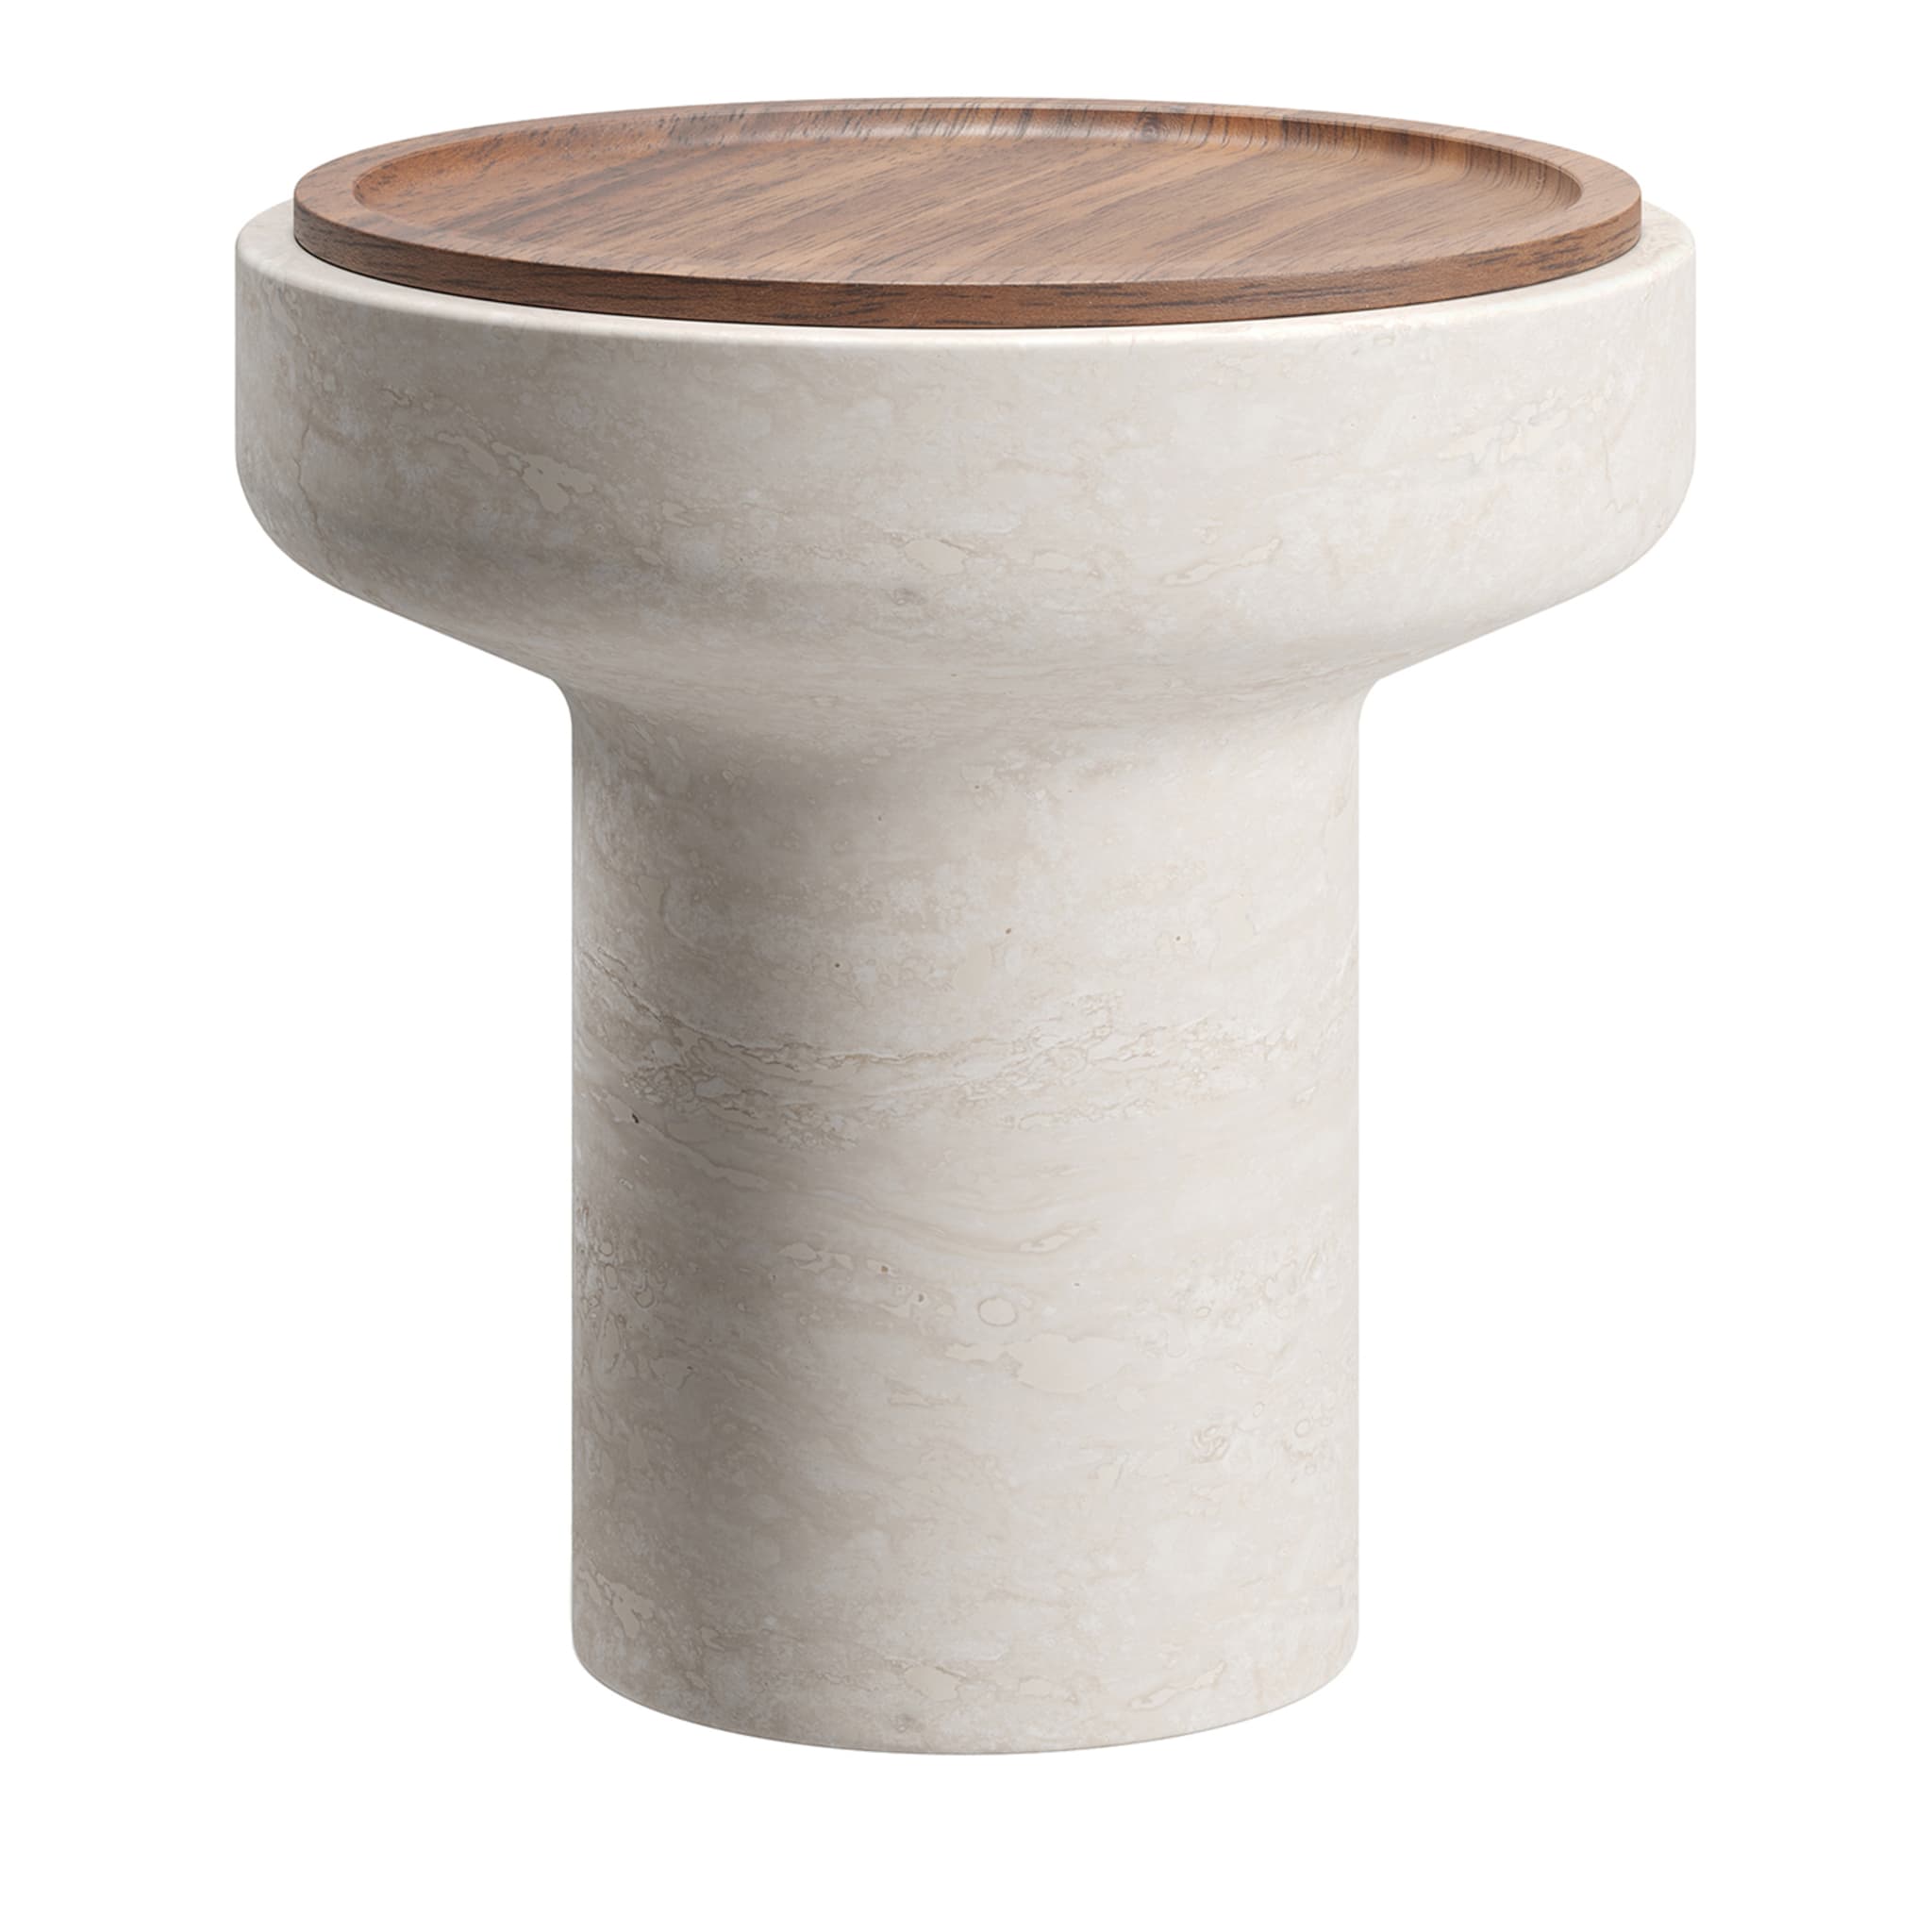 Tivoli Side Table in travertine and walnut by Ivan Colominas - Main view